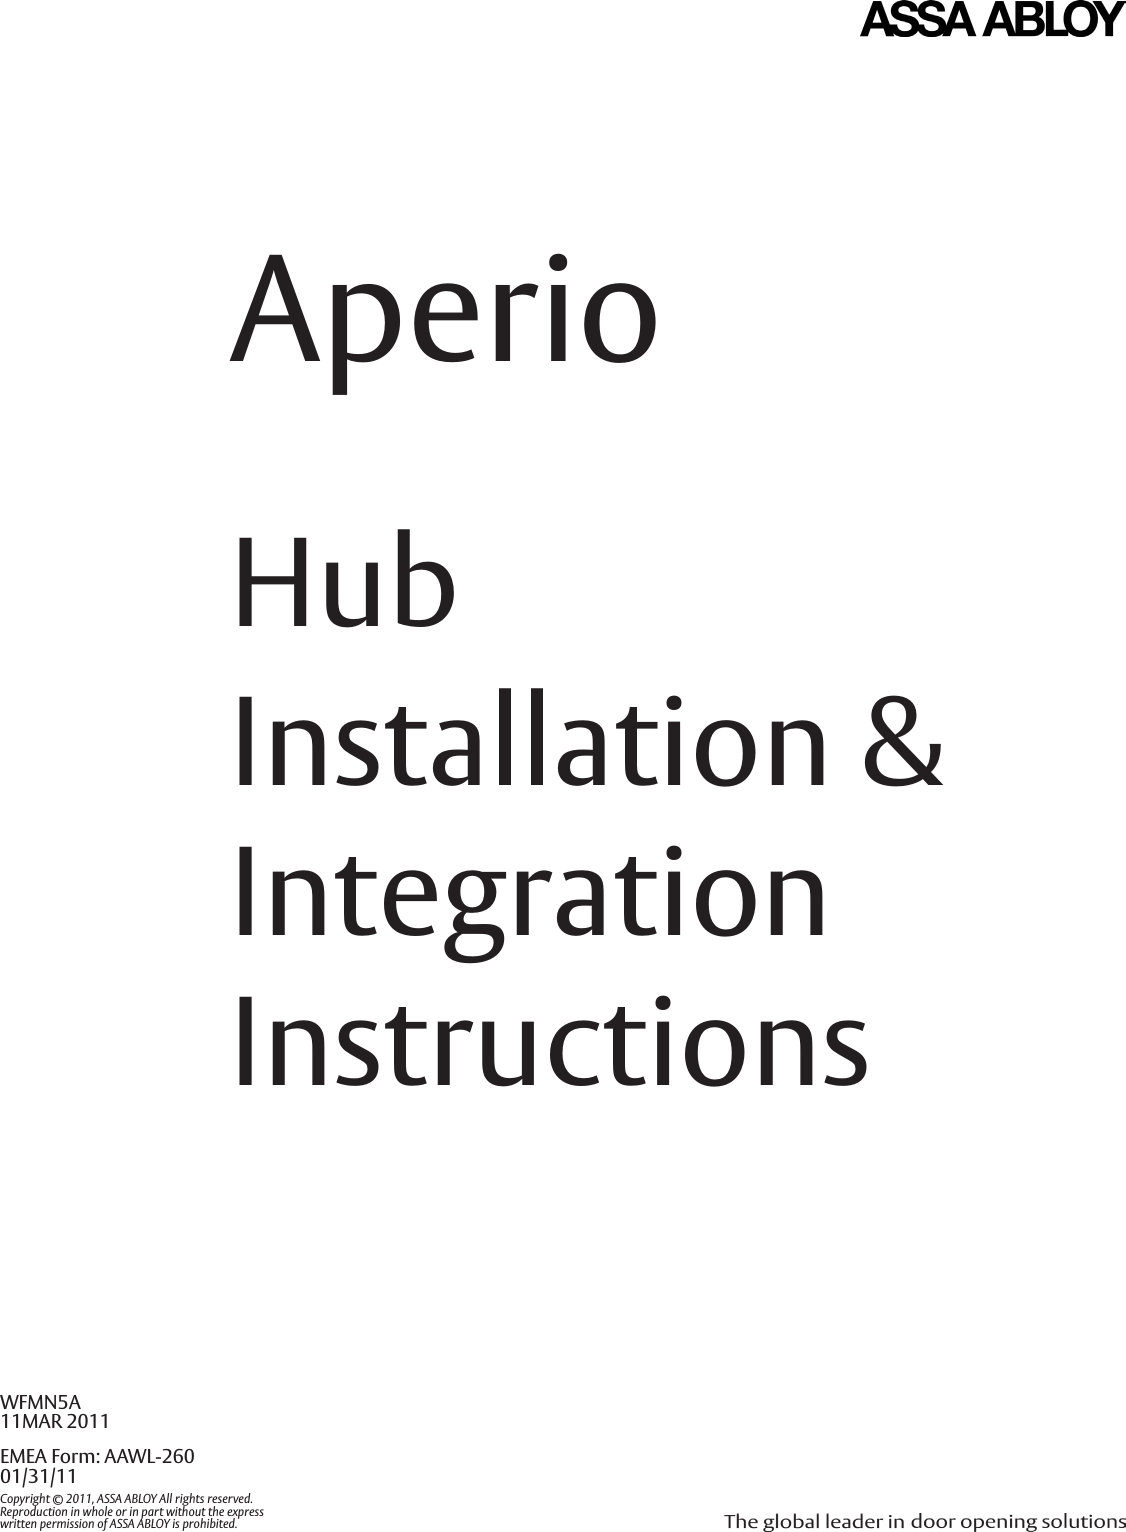 AperioHub Installation &amp;  Integration InstructionsWFMN5A11MAR 2011Copyright © 2011, ASSA ABLOY All rights reserved.  Reproduction in whole or in part without the express  written permission of ASSA ABLOY is prohibited.EMEA Form: AAWL-260 01/31/11